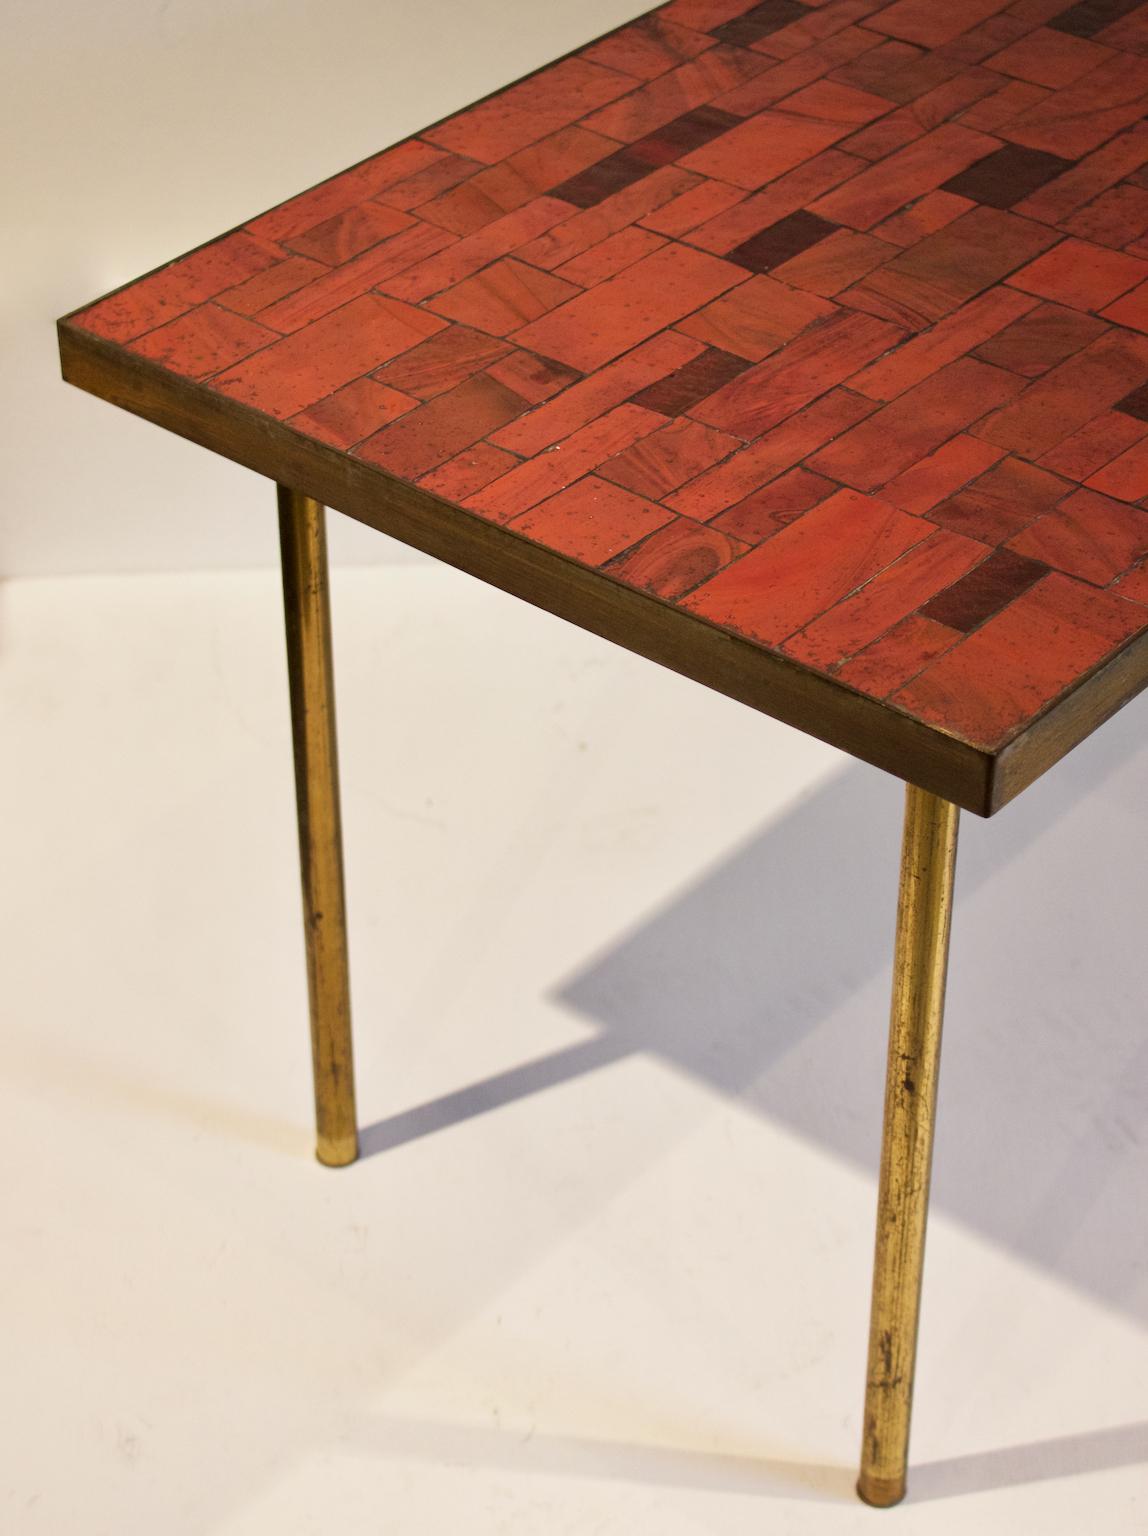 Midcentury Mosaic Side Table in Warm Red Tones by Müller, Germany, ‘Signed’ In Good Condition For Sale In London, GB